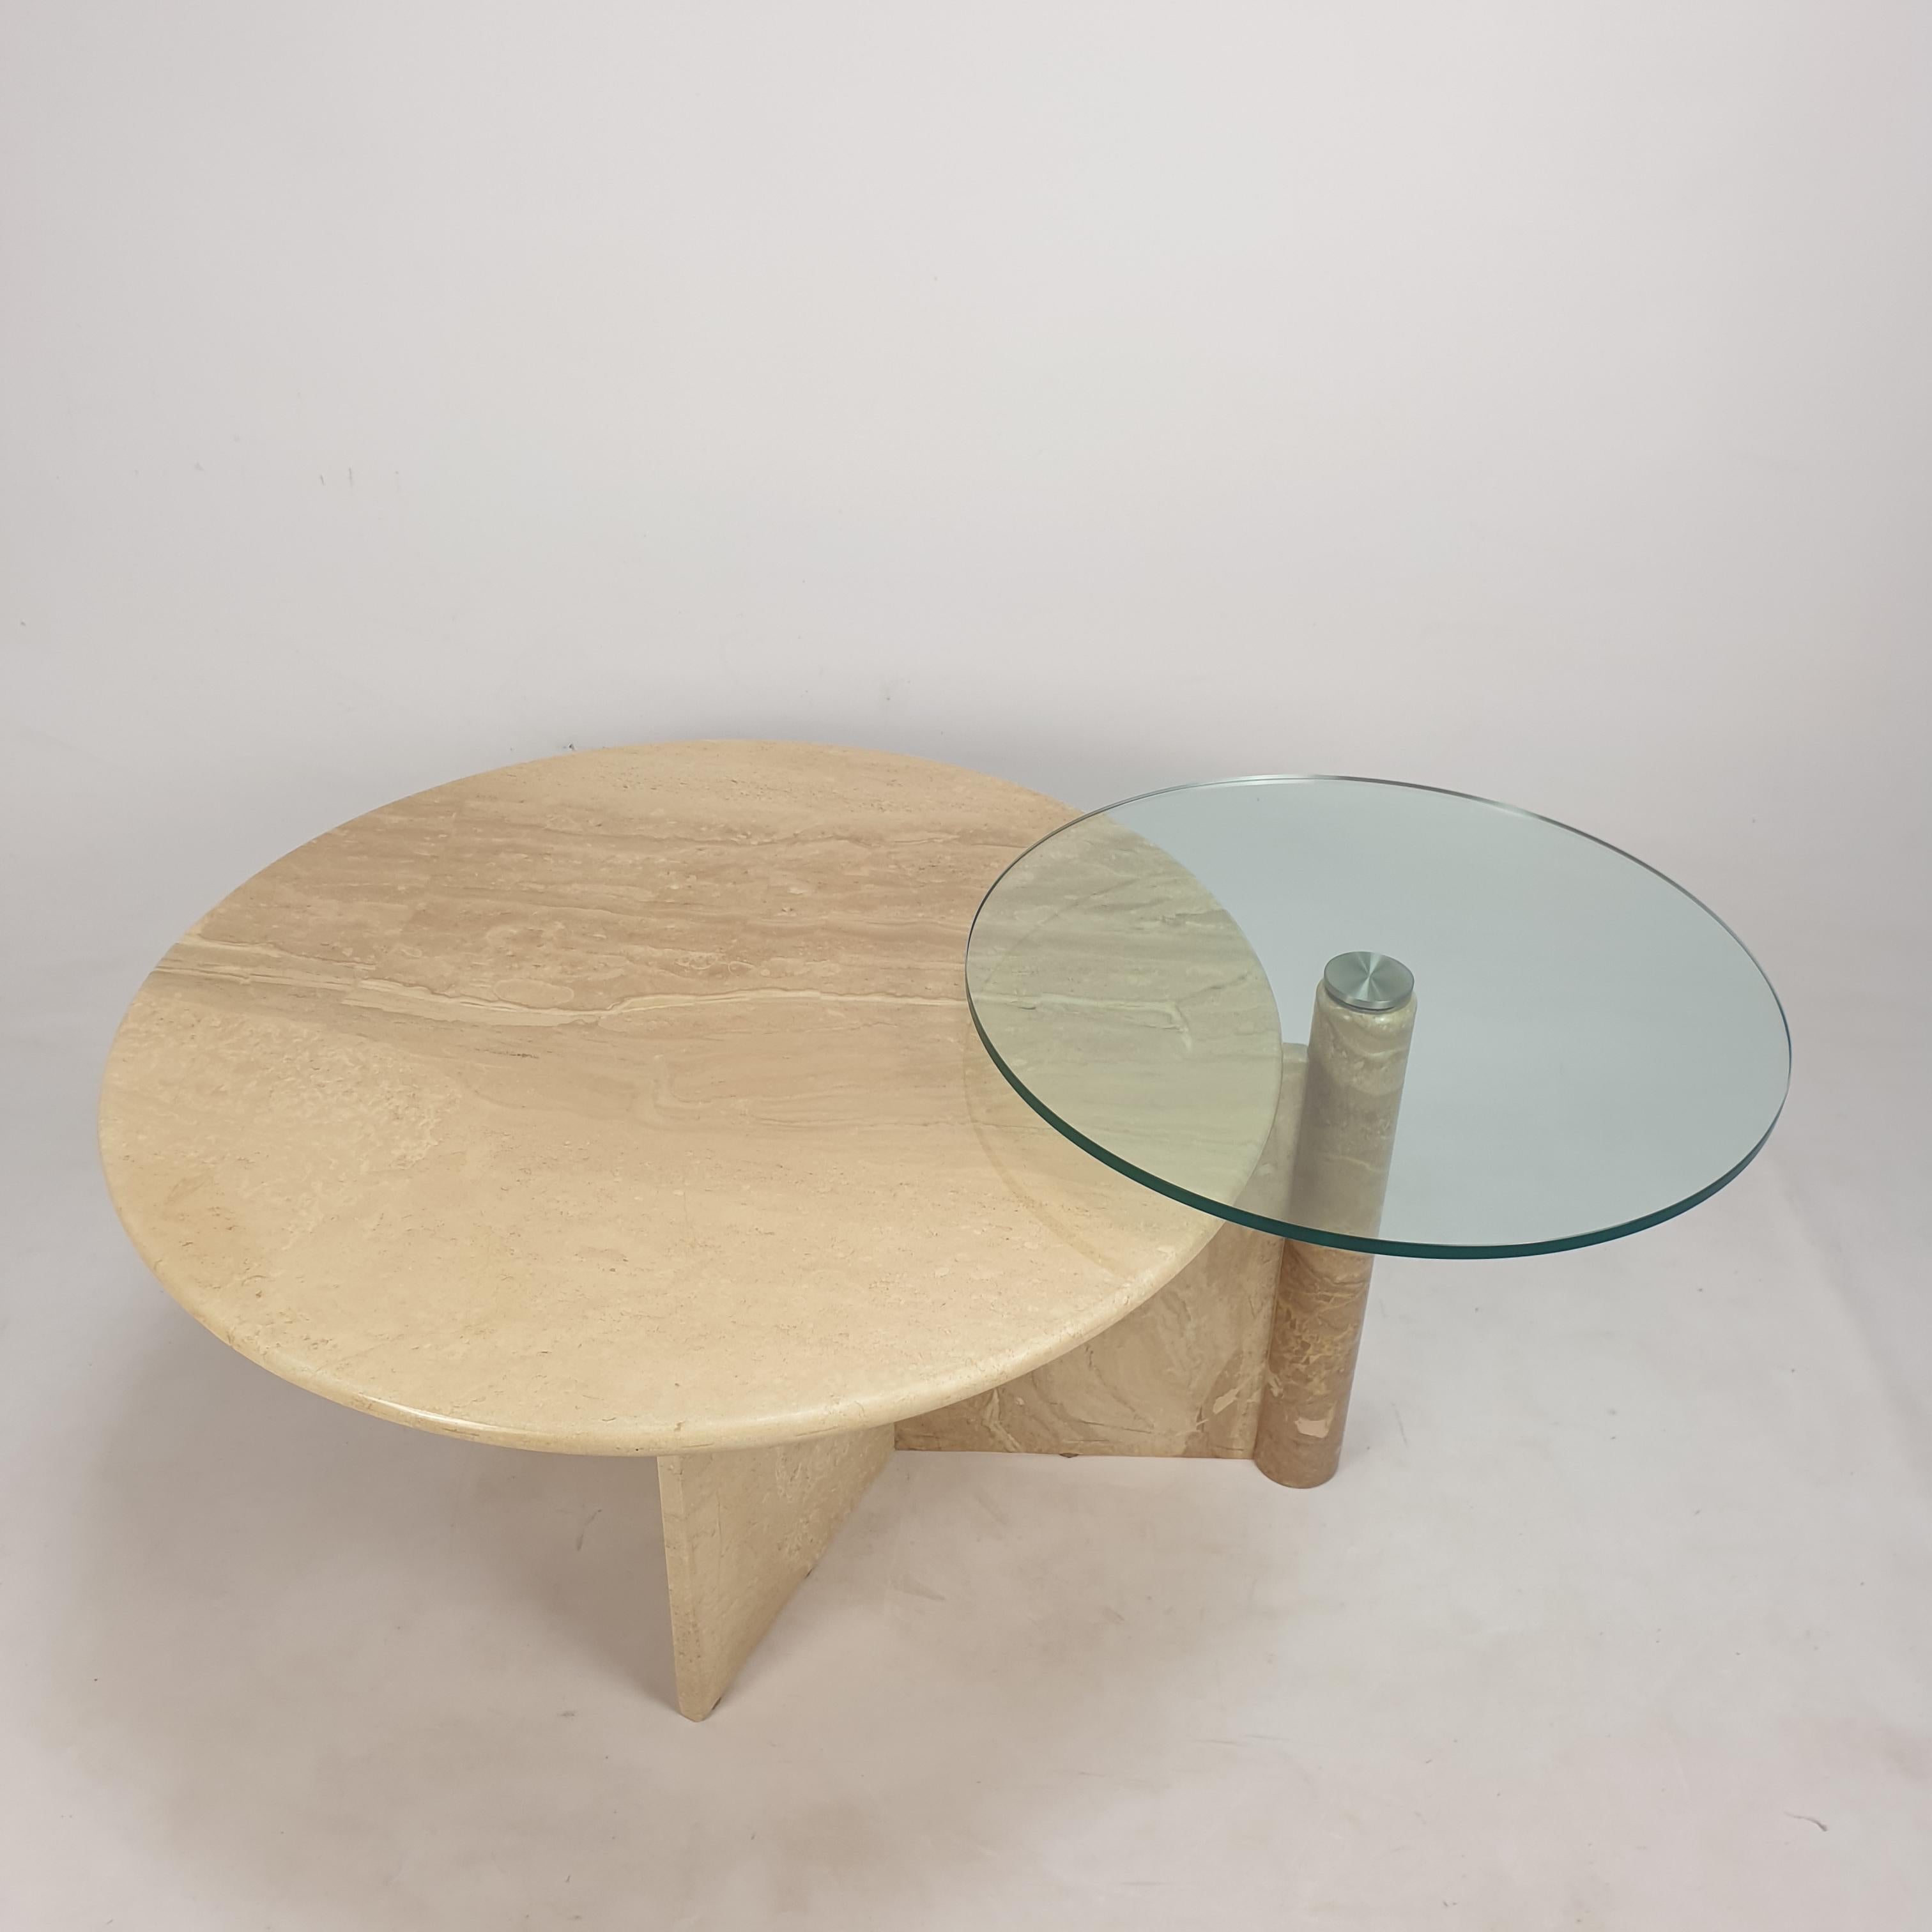 Late 20th Century Italian Travertine and Glass Coffee Table, 1980s For Sale